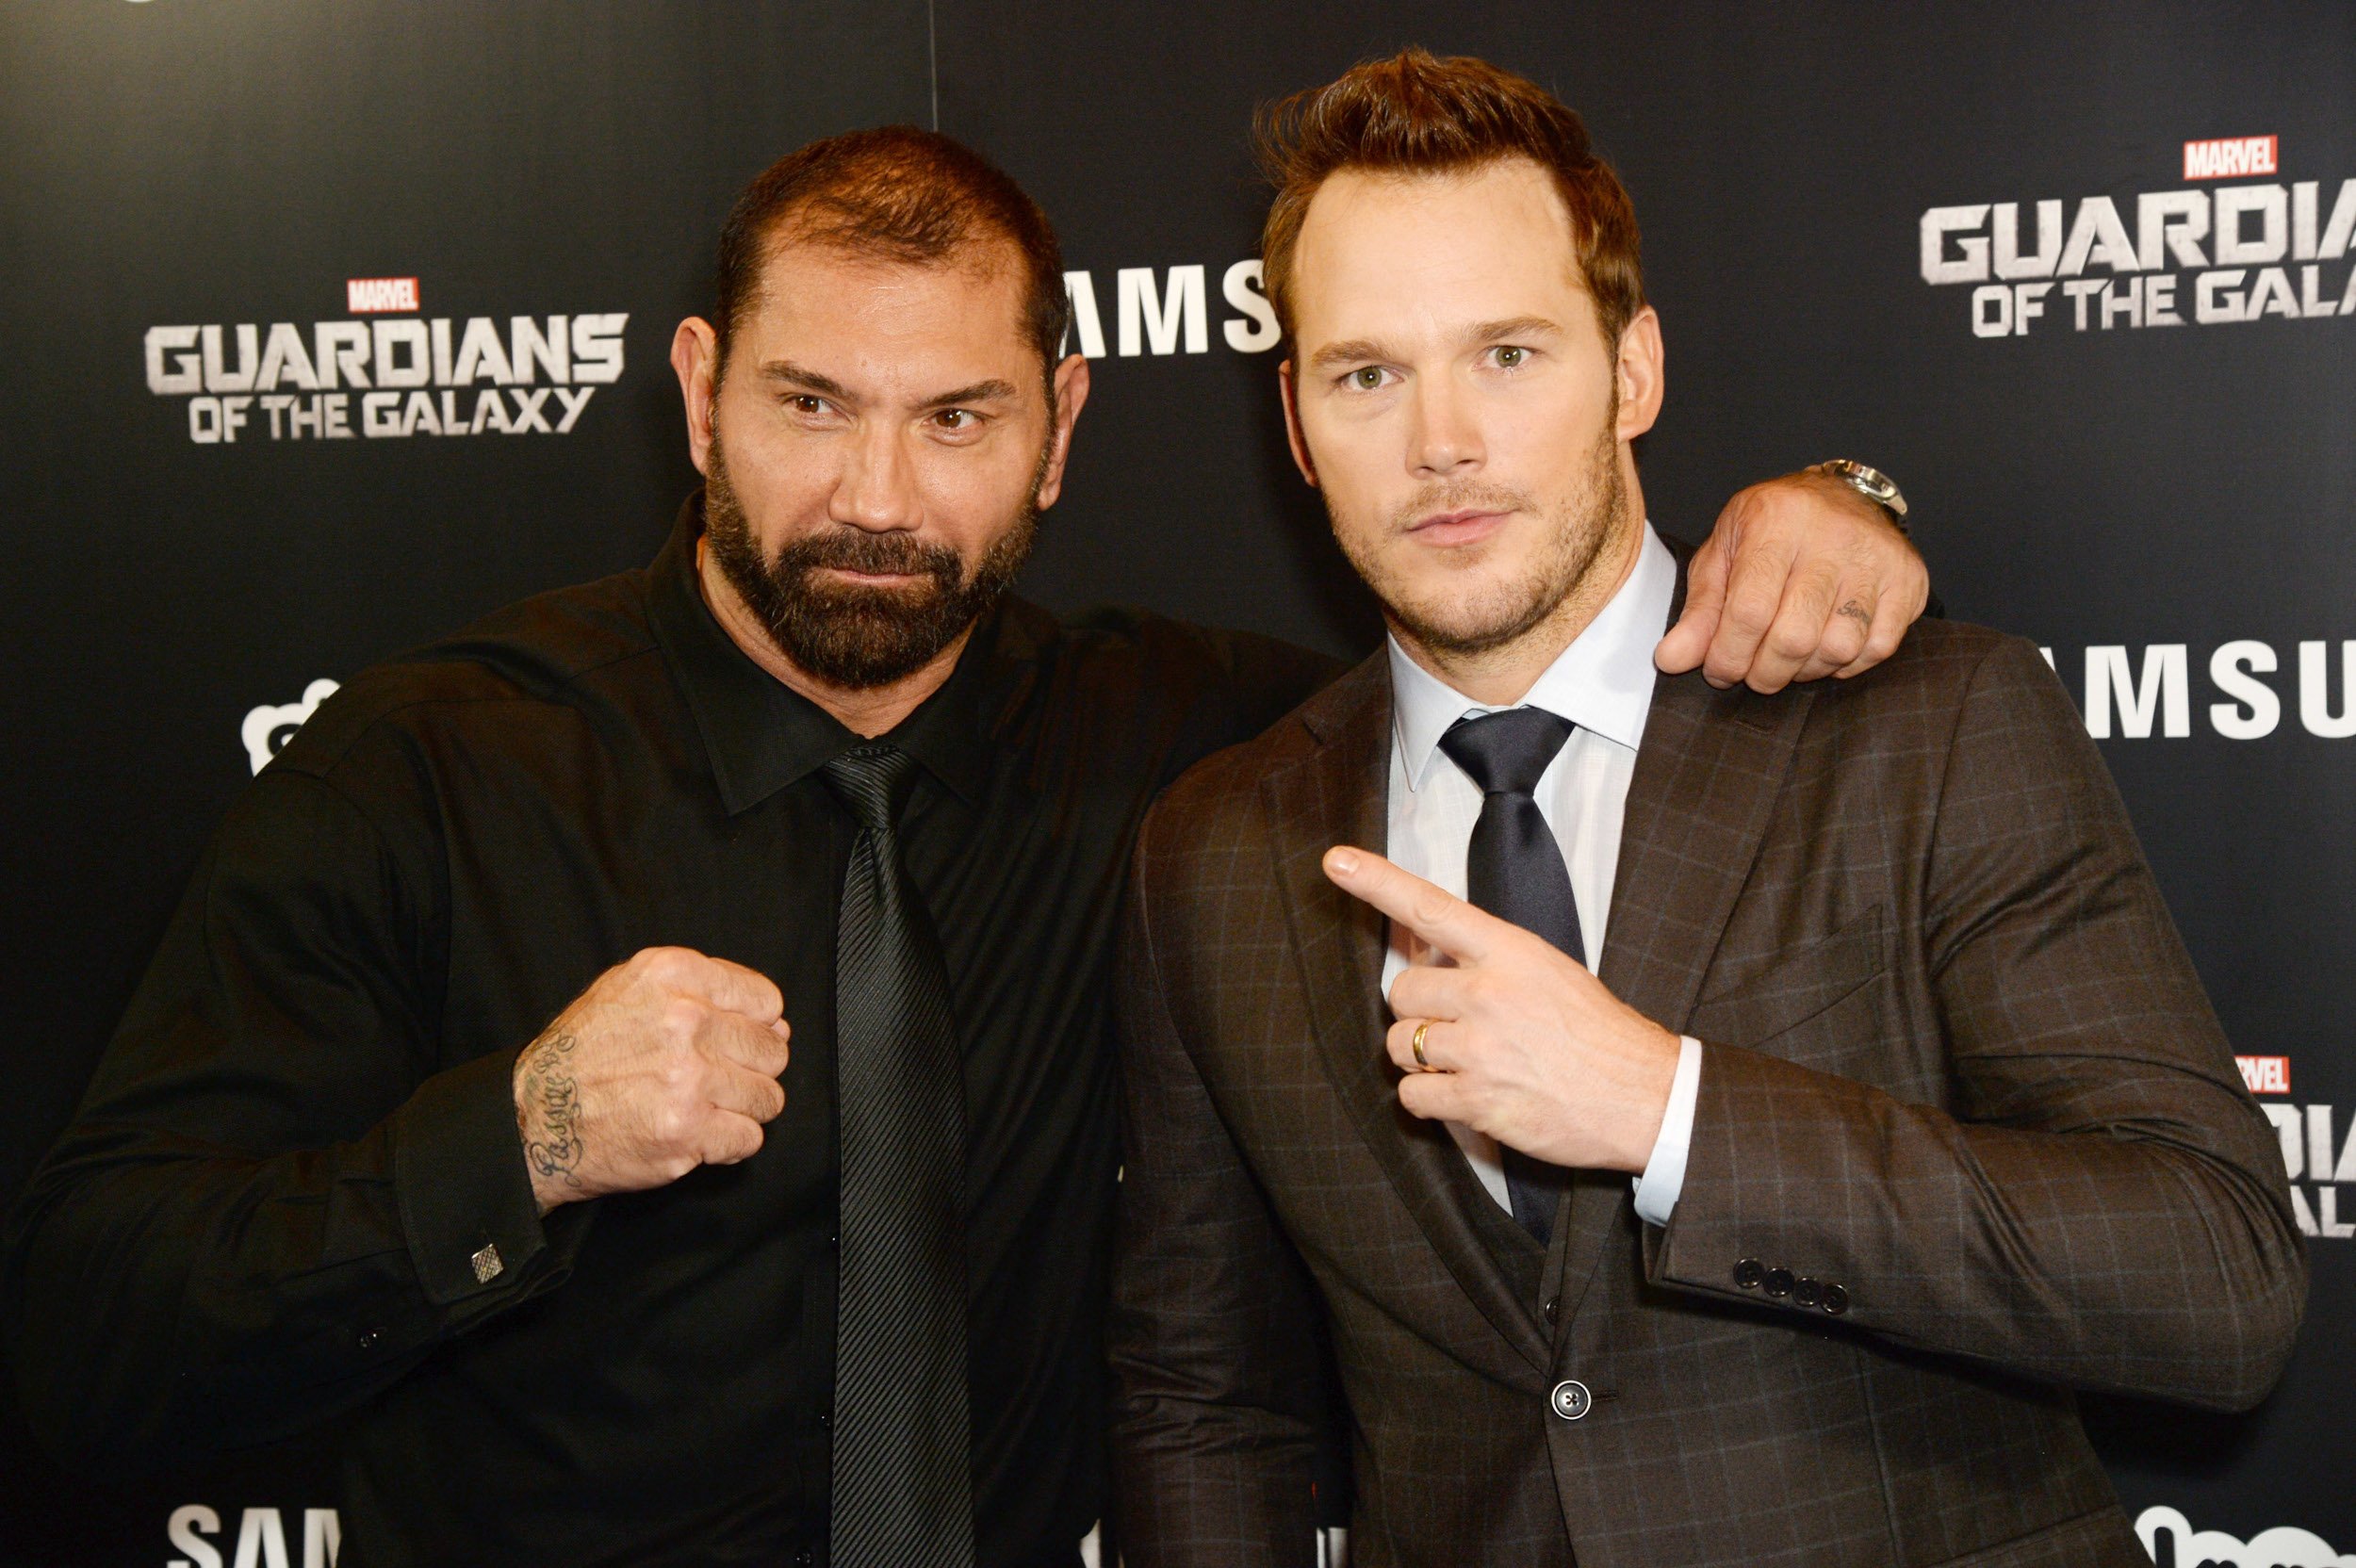 Dave Bautista and Chris Pratt stand in front of 'Guardians of the Galaxy' wall